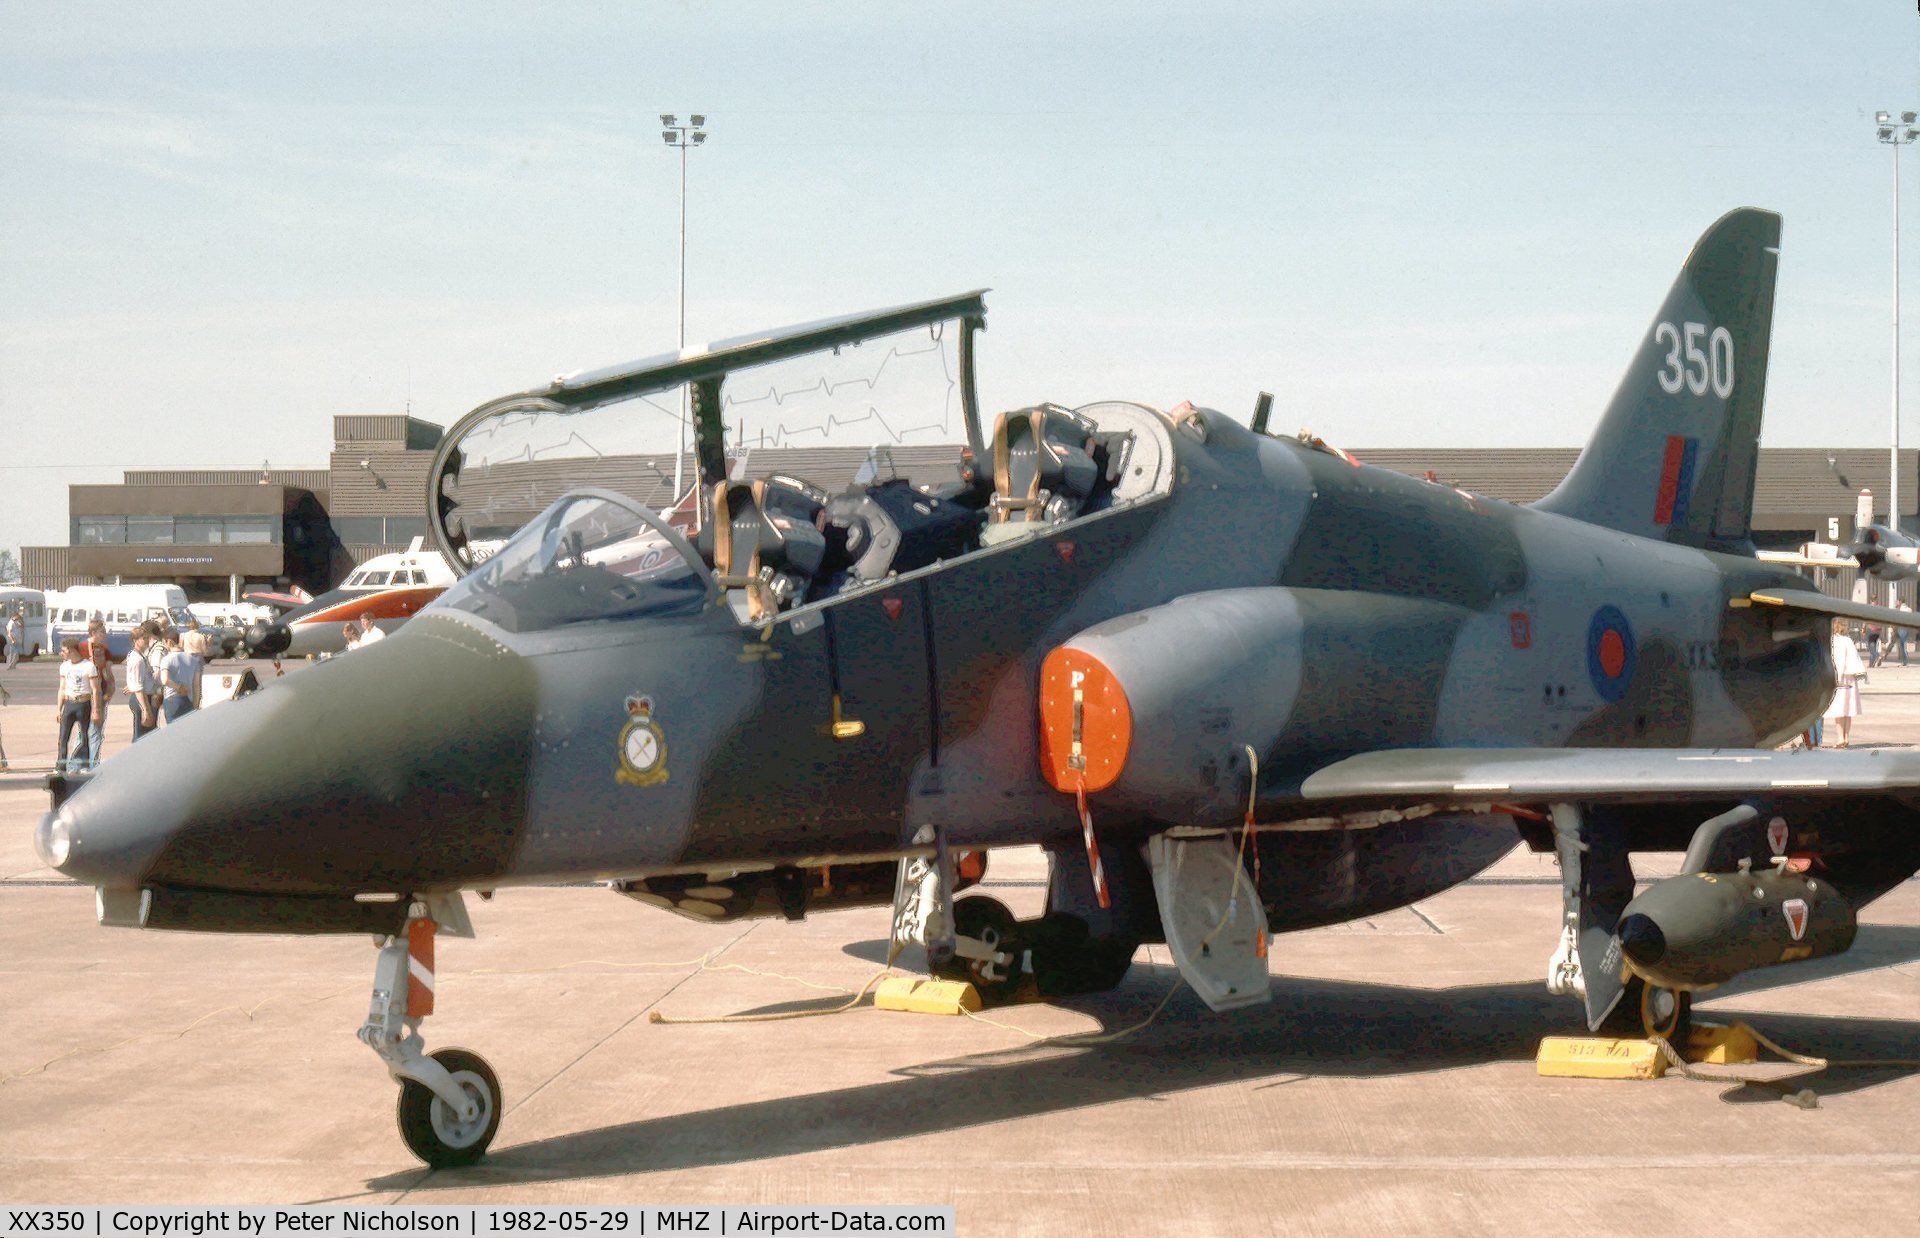 XX350, 1981 Hawker Siddeley Hawk T.1 C/N 199/312174, Hawk T.1 of 1 Tactical Weapons Unit on display at the 1982 RAF Mildenhall Air Fete.